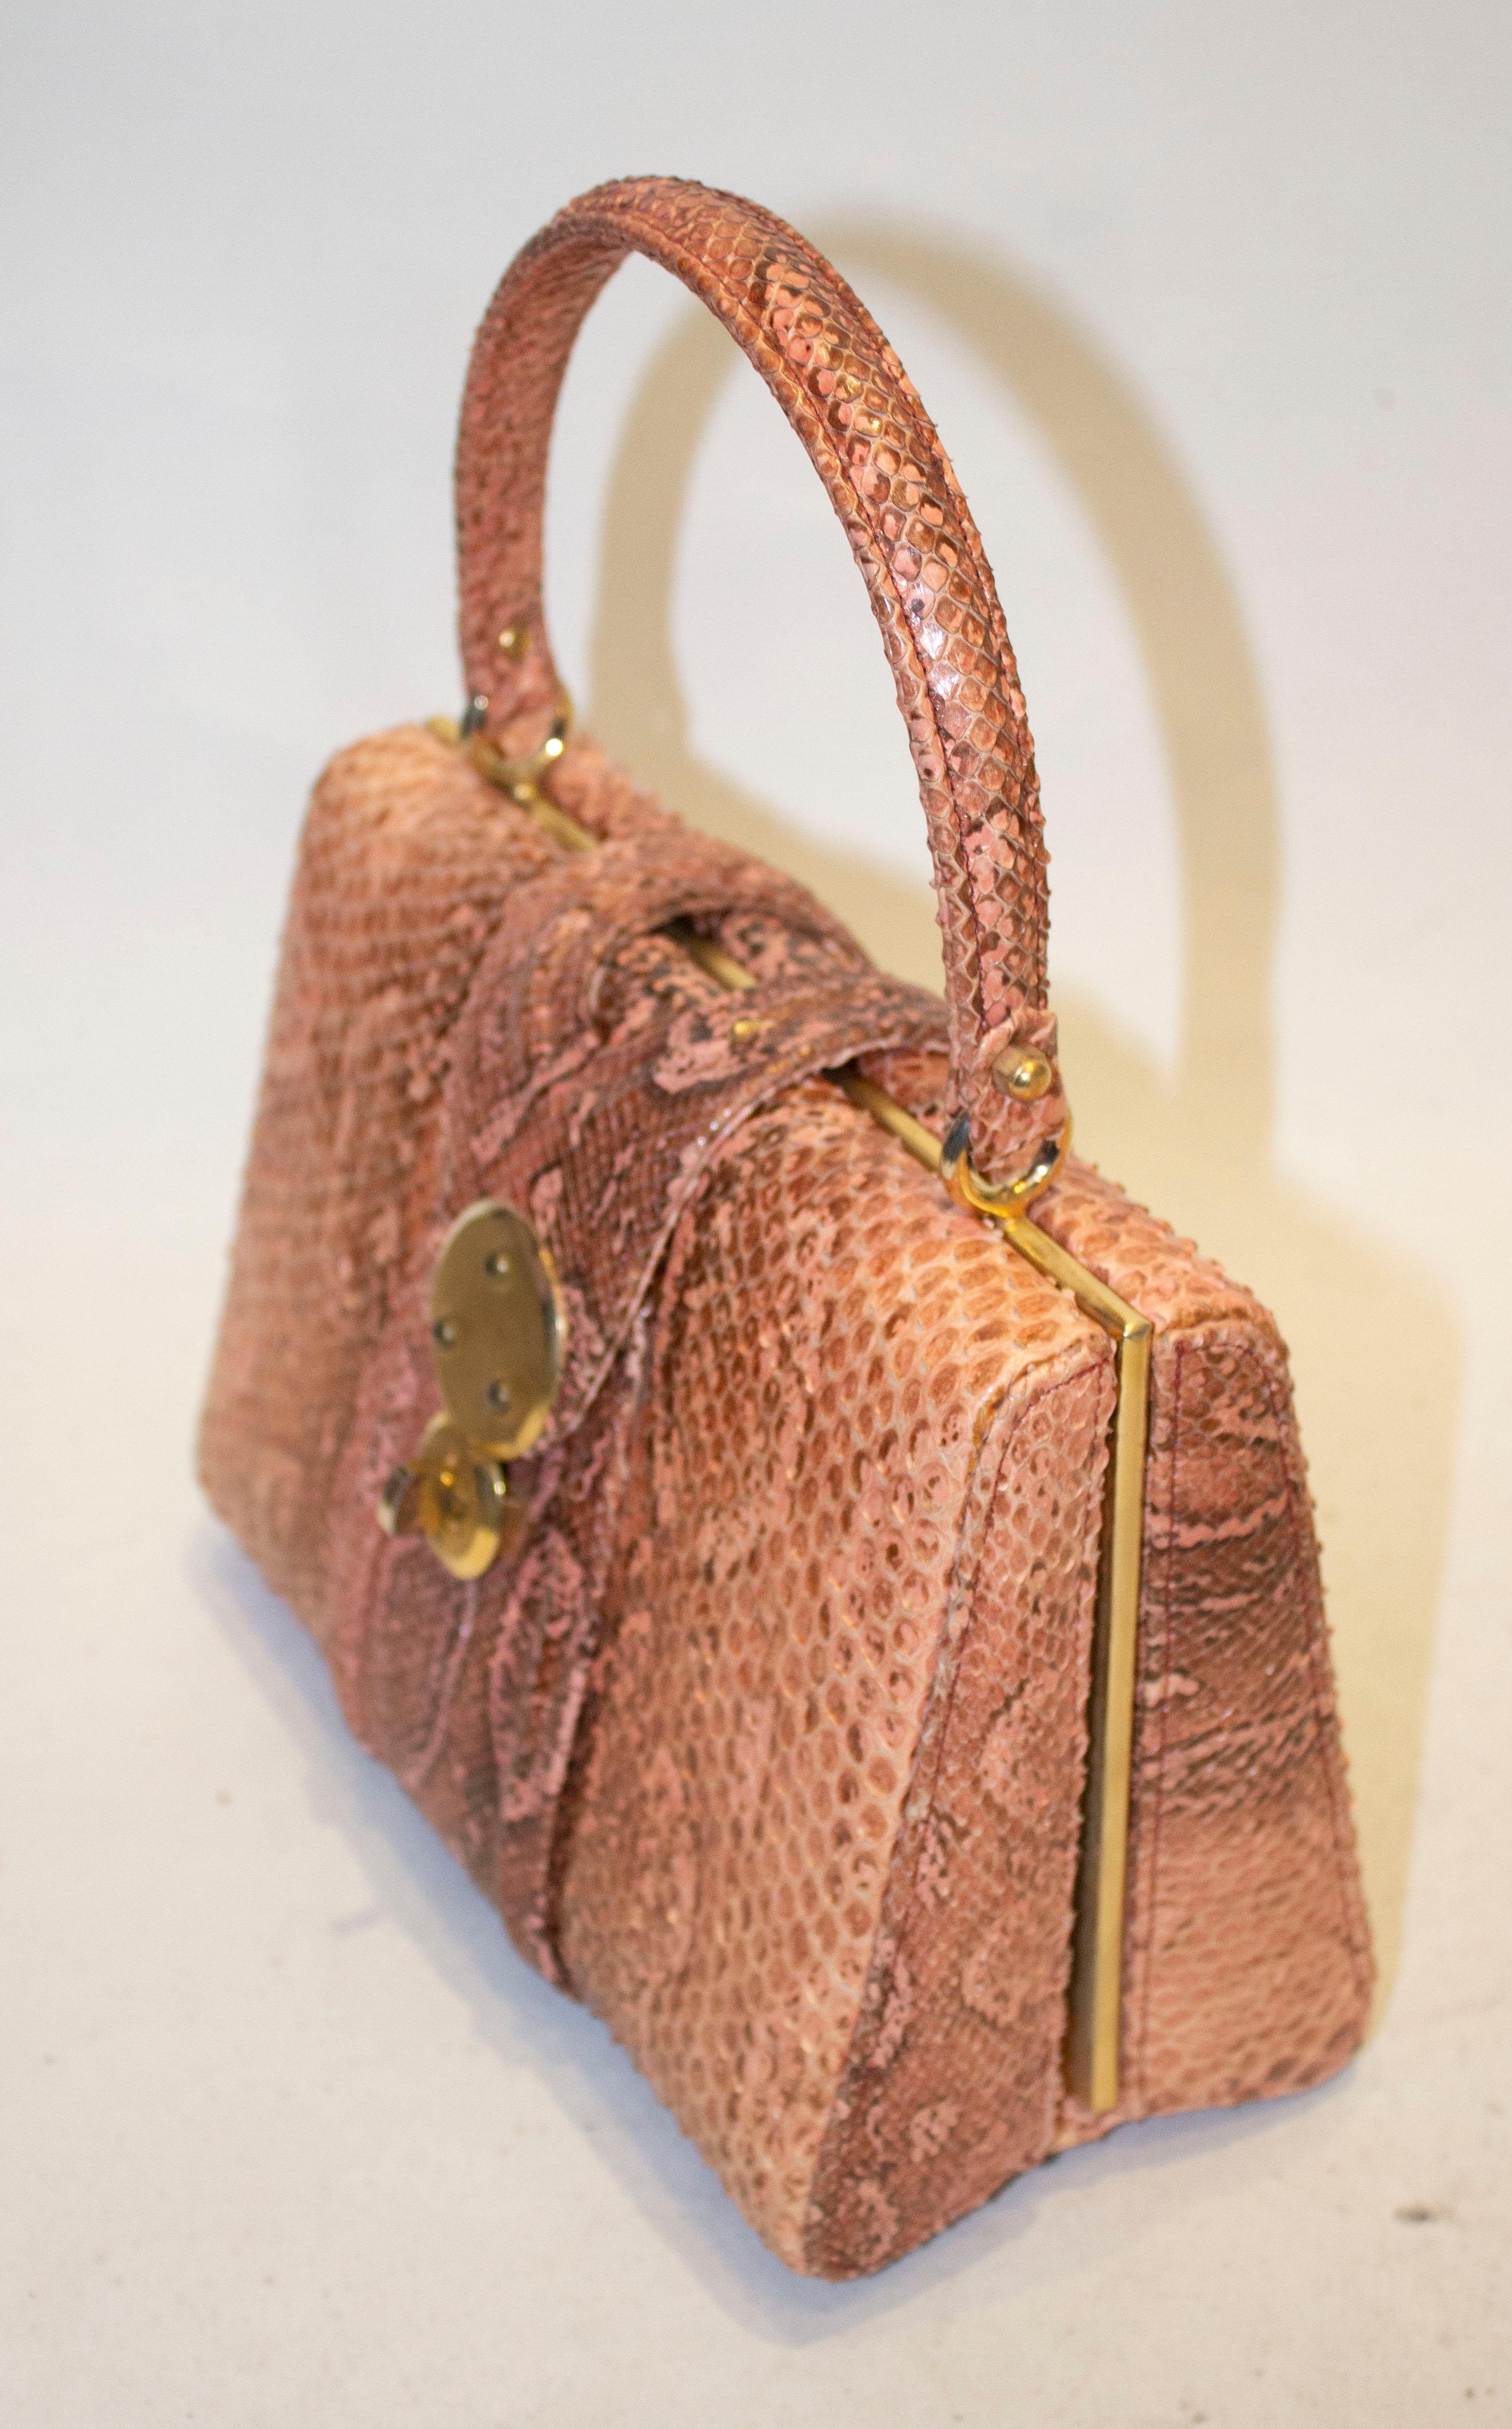 A wonderful vintage snakeskin handbag.  This bag is not only a beautiful colour but large enough for todays essentials.  It has a flap over opening with a clasp, and inside there are two compartments, one with a puc9k pocket and one with a zip